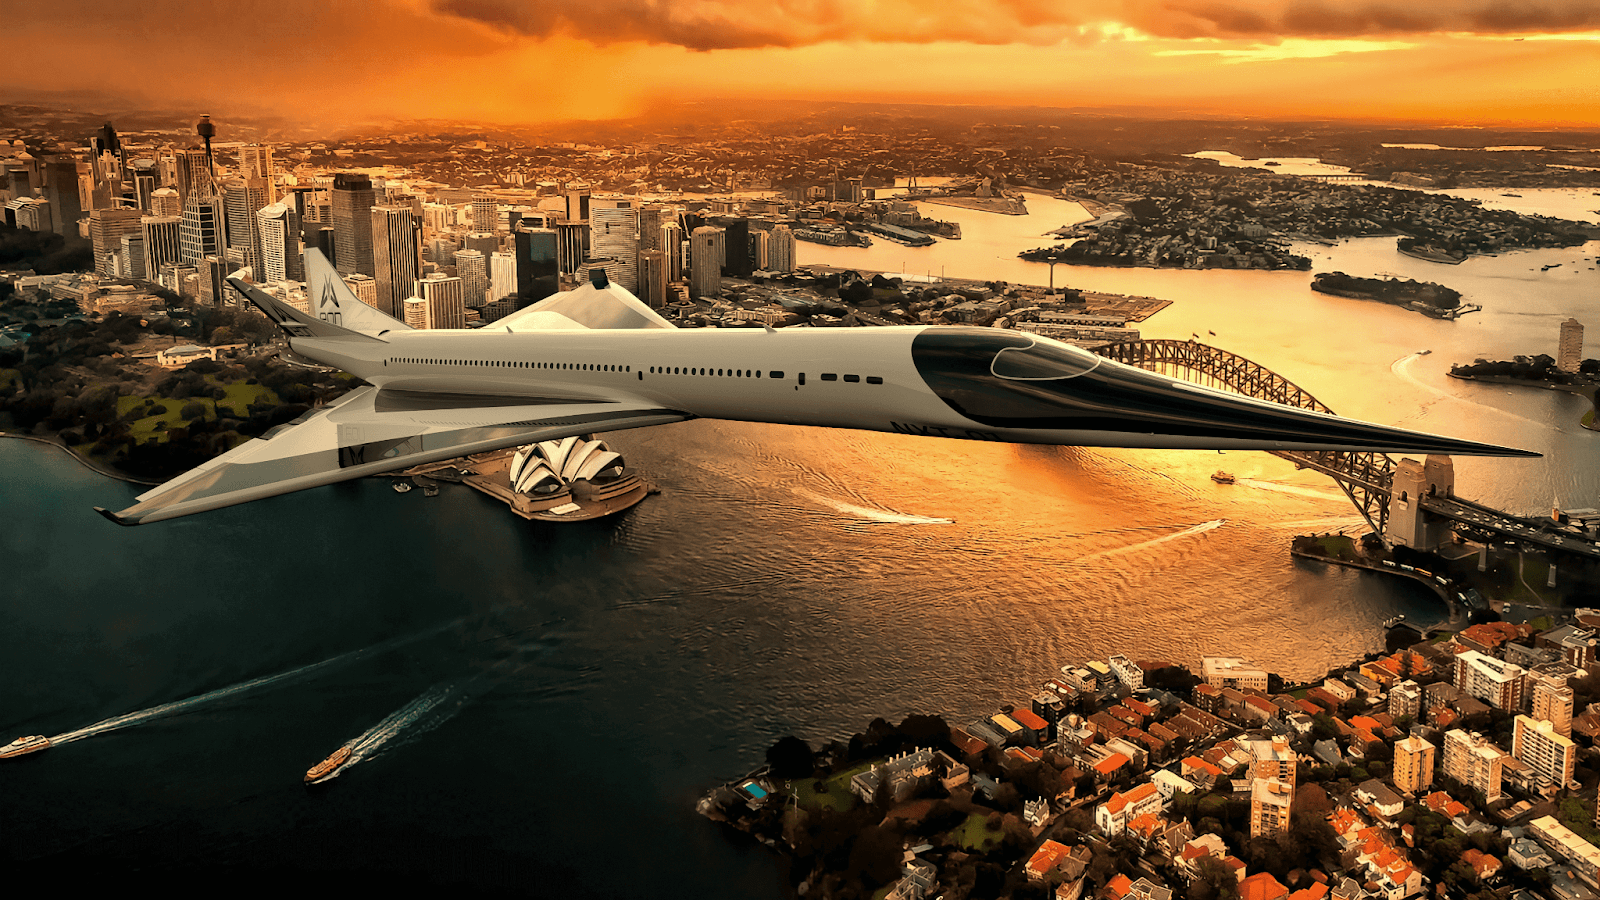 When Will Supersonic Passenger Planes Come Back?